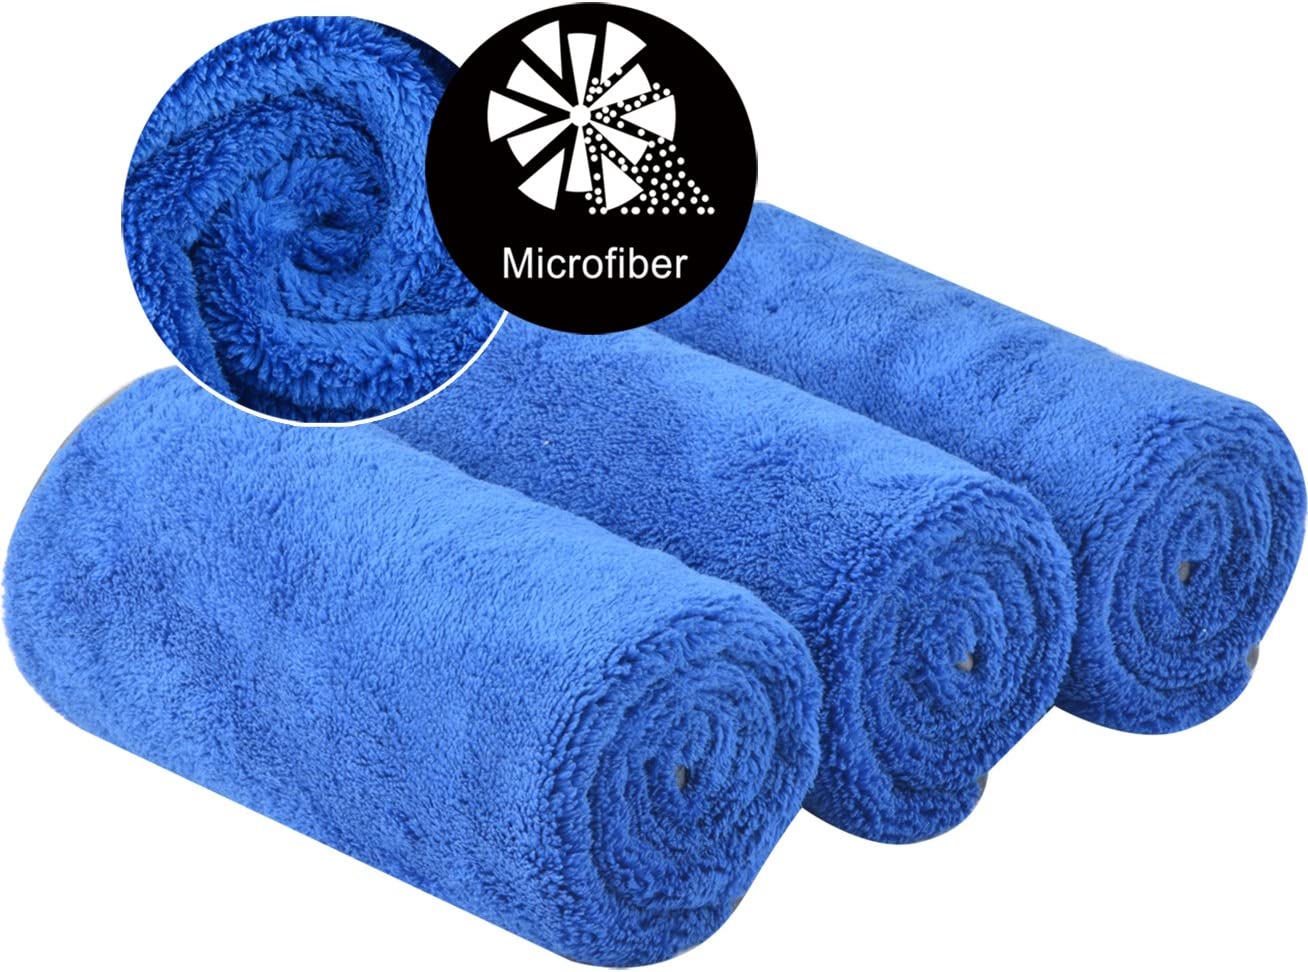 Car Drying Towel Absorbent Car Wash Towels Soft Microfiber Drying Towels for Car Detailing Lint-Free and Scratch-Free Ideal for auto Trucks Boats SUV 16inch x 24inch 3 Pack Blue